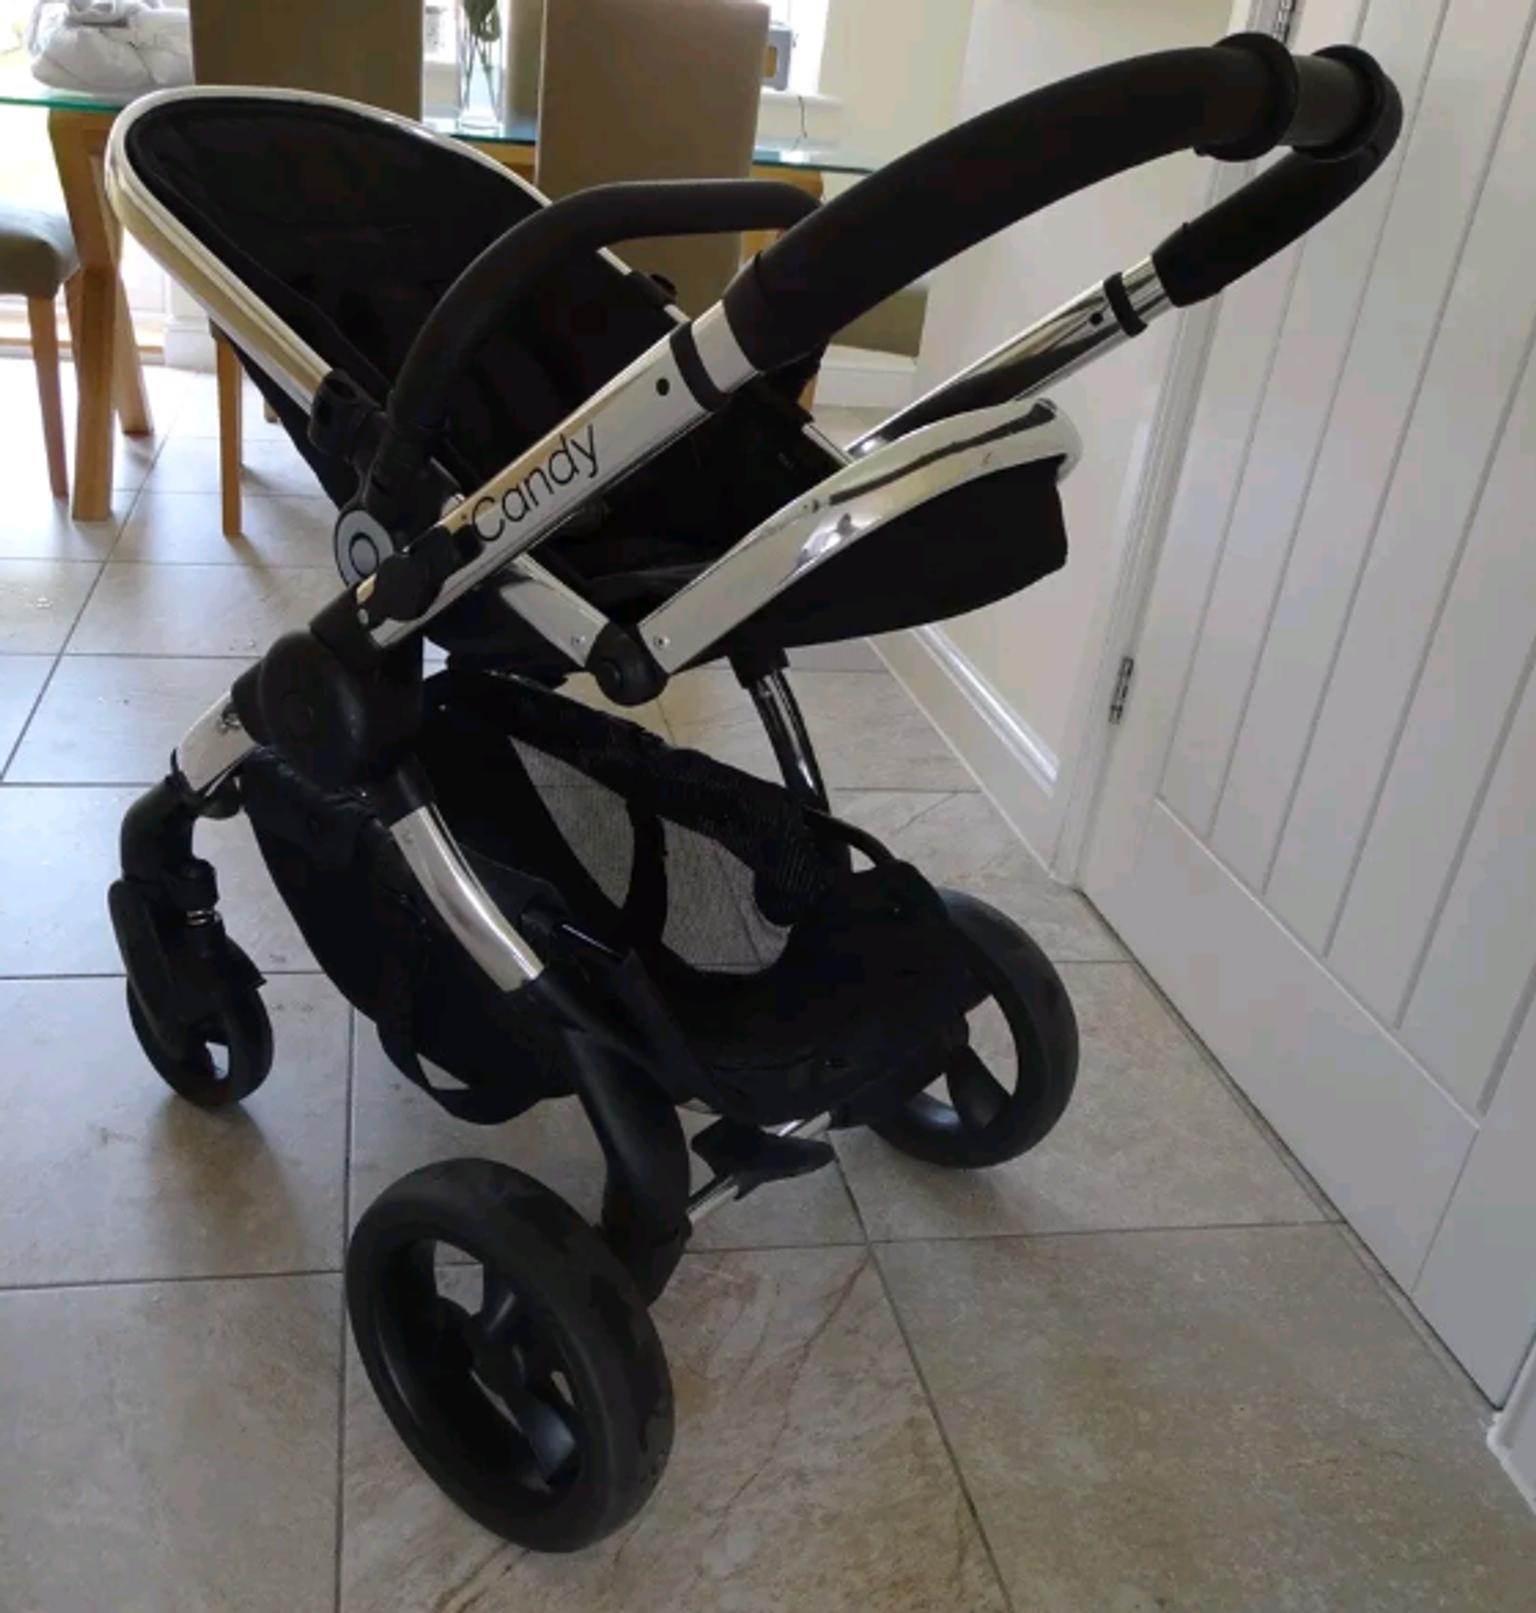 icandy peach pushchair and carrycot set black magic 2